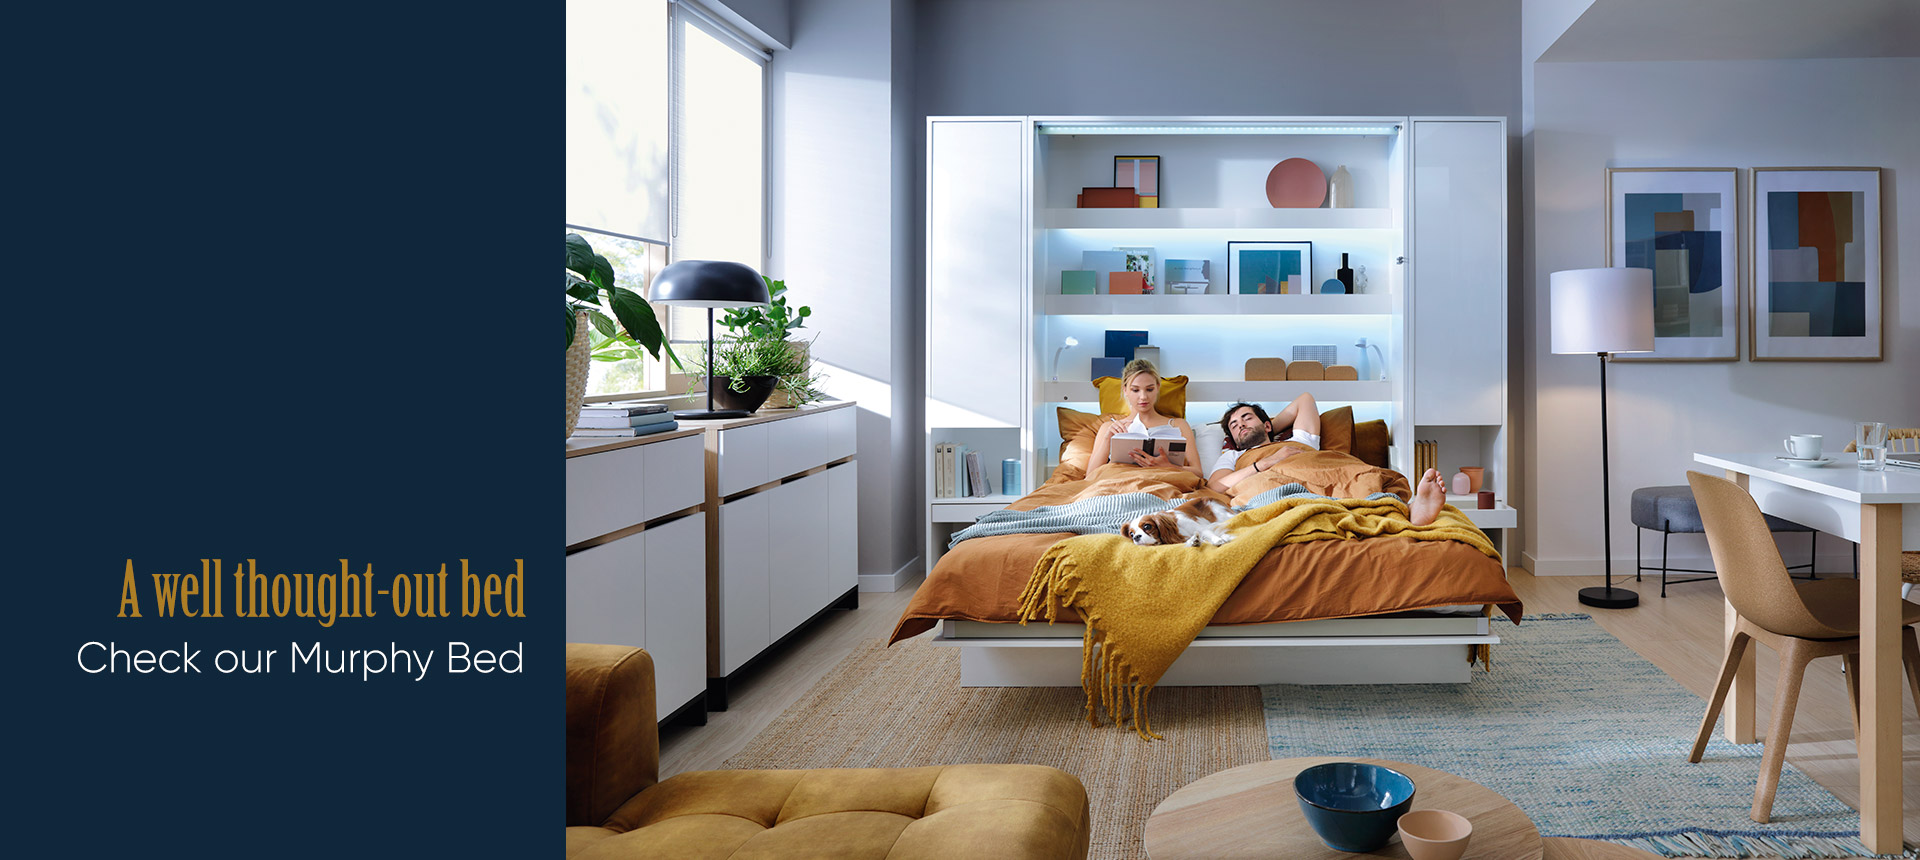 Murphy Bed - Online store Smart Furniture Mississauga